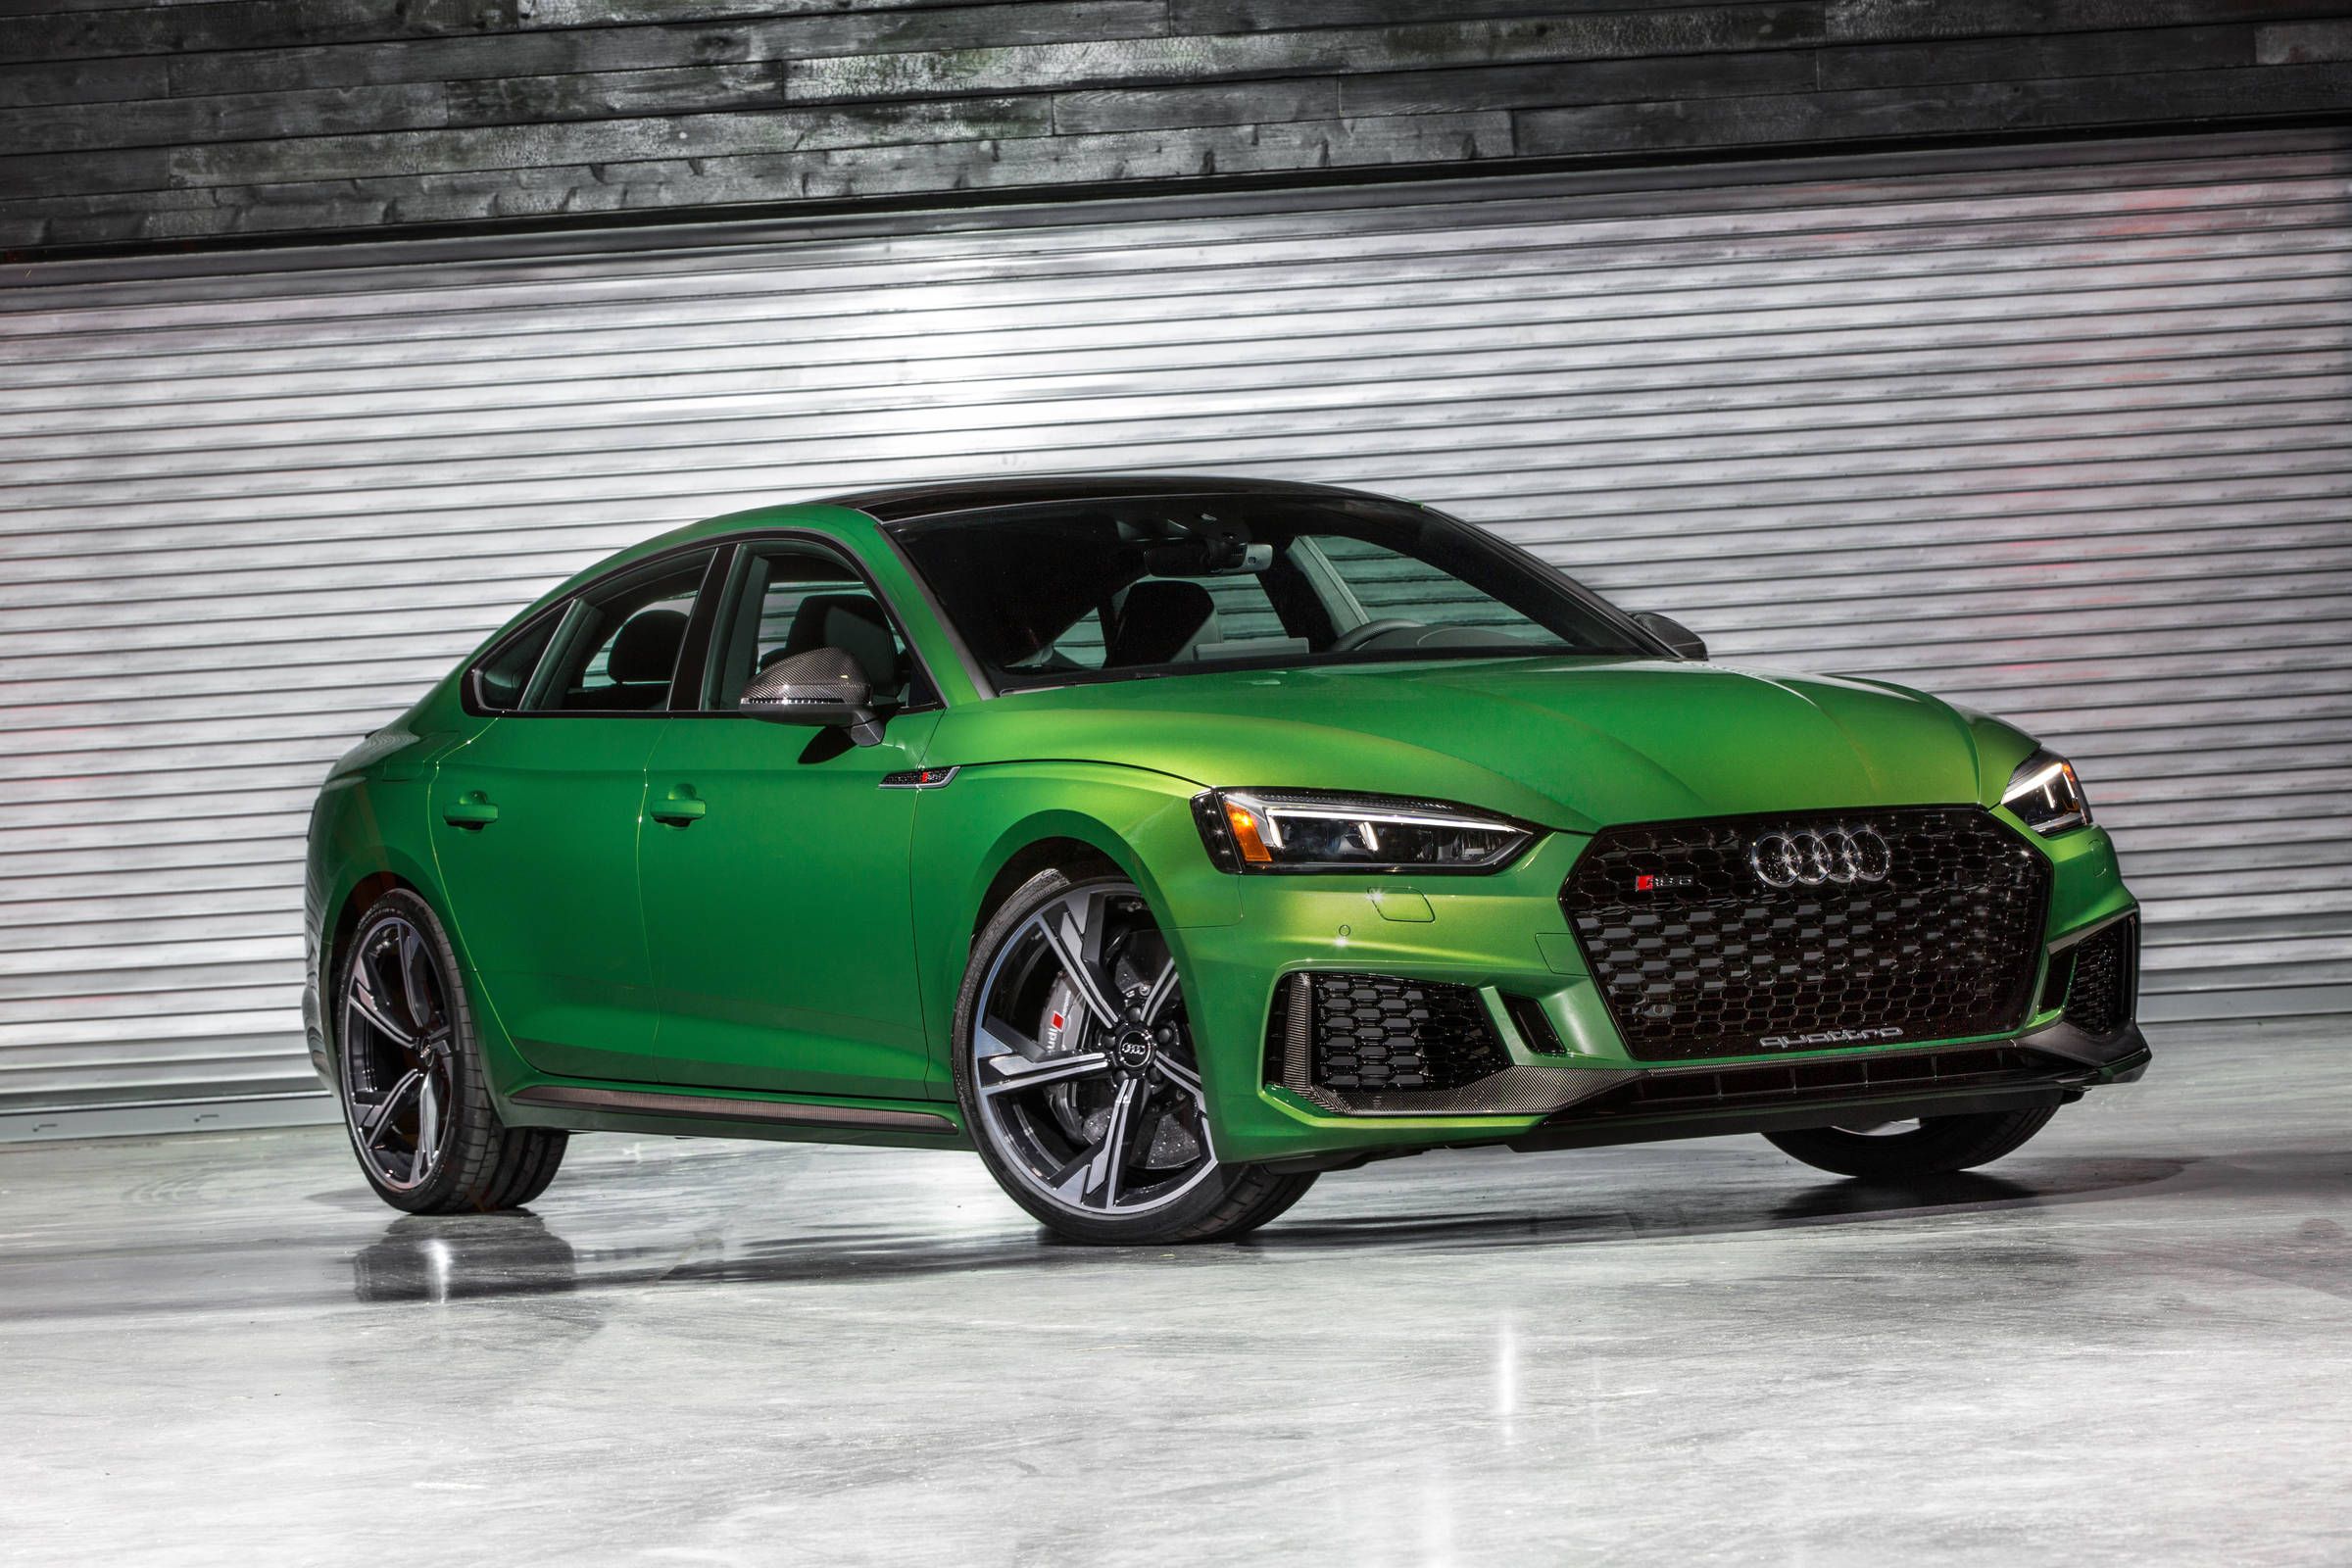 2019 Audi RS5 Sportback road test: Everything you need to know